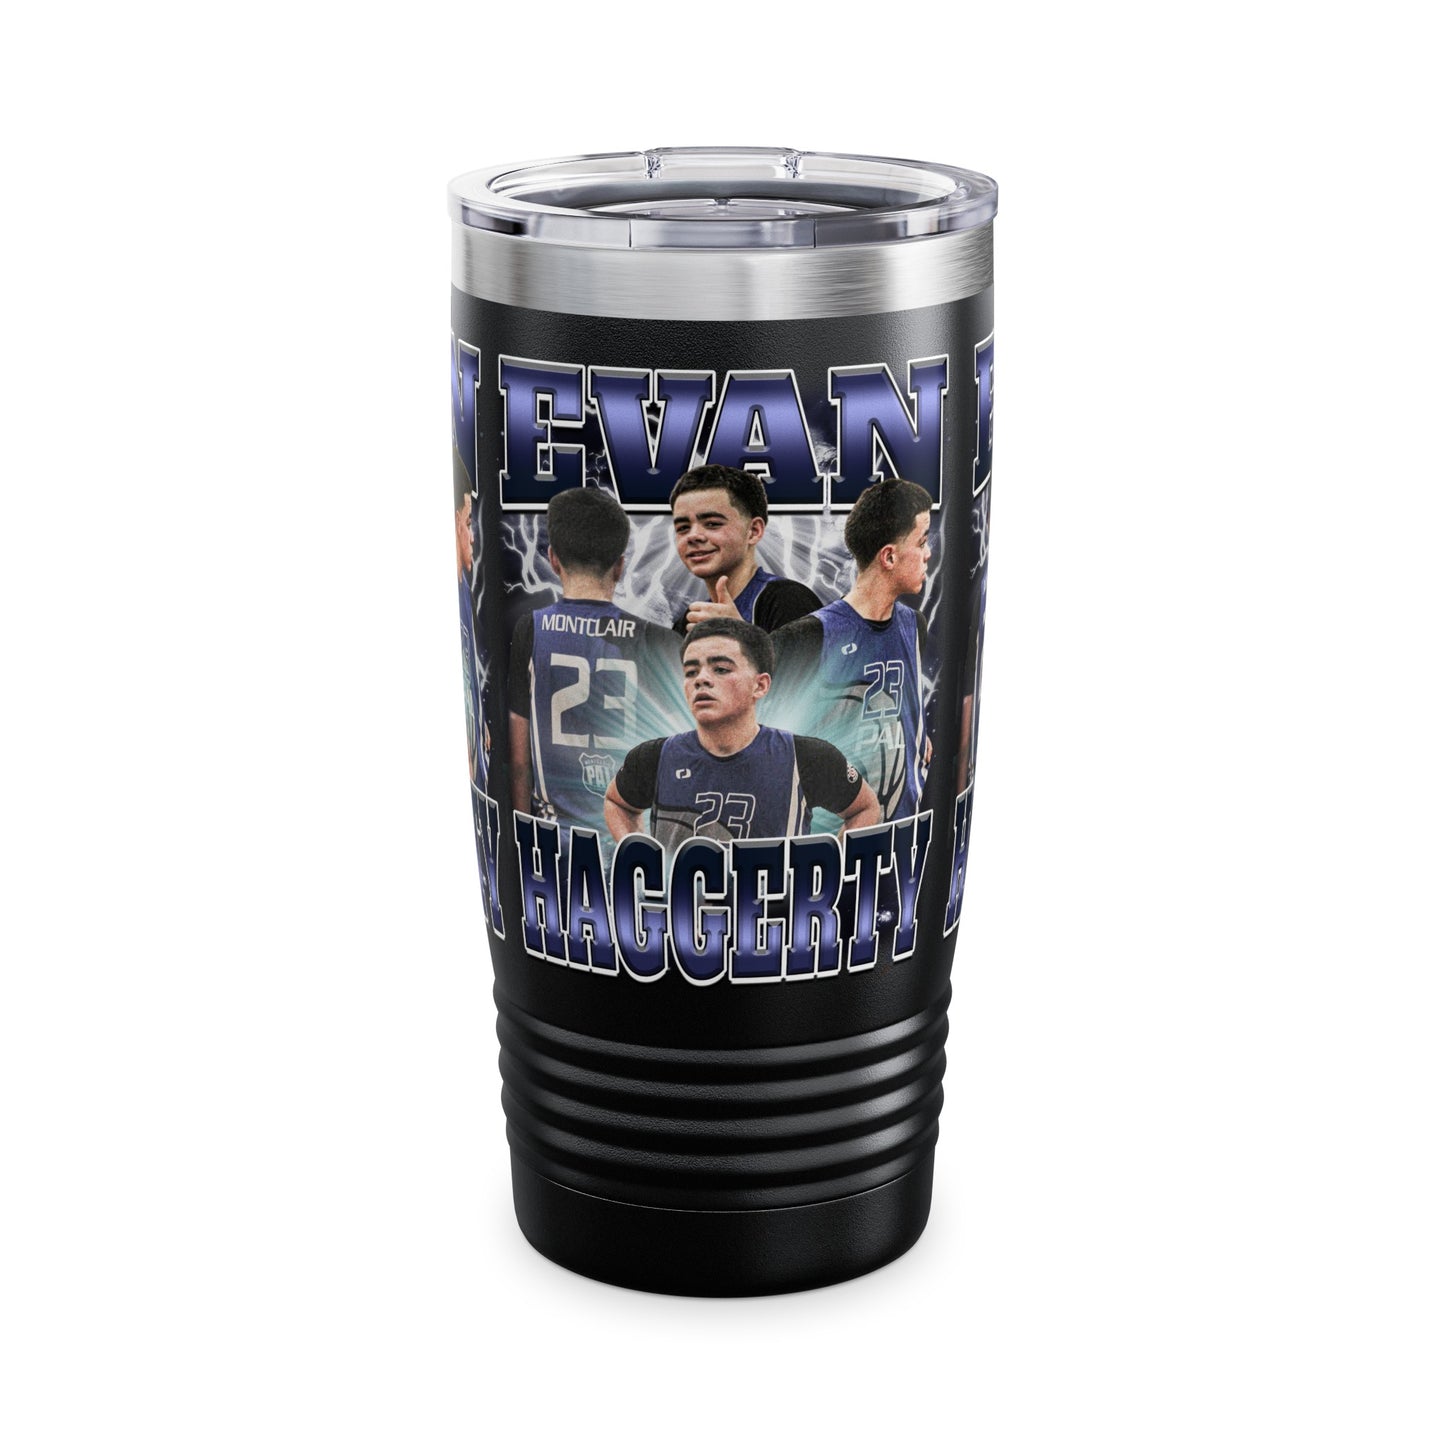 Evan Haggerty Stainless Steal Tumbler